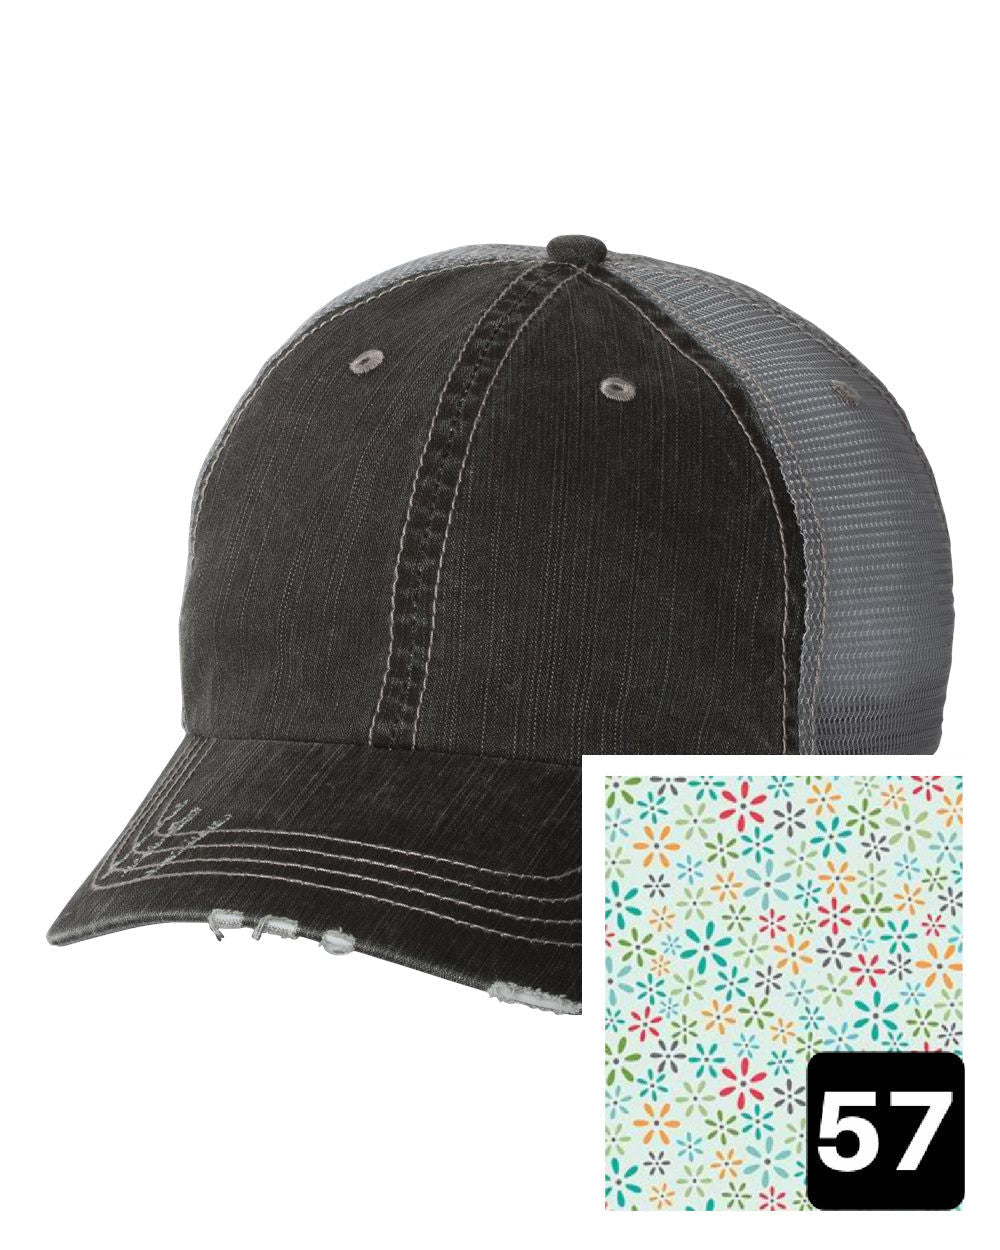 gray distressed trucker hat with white daisy on yellow fabric state of New Hampshire